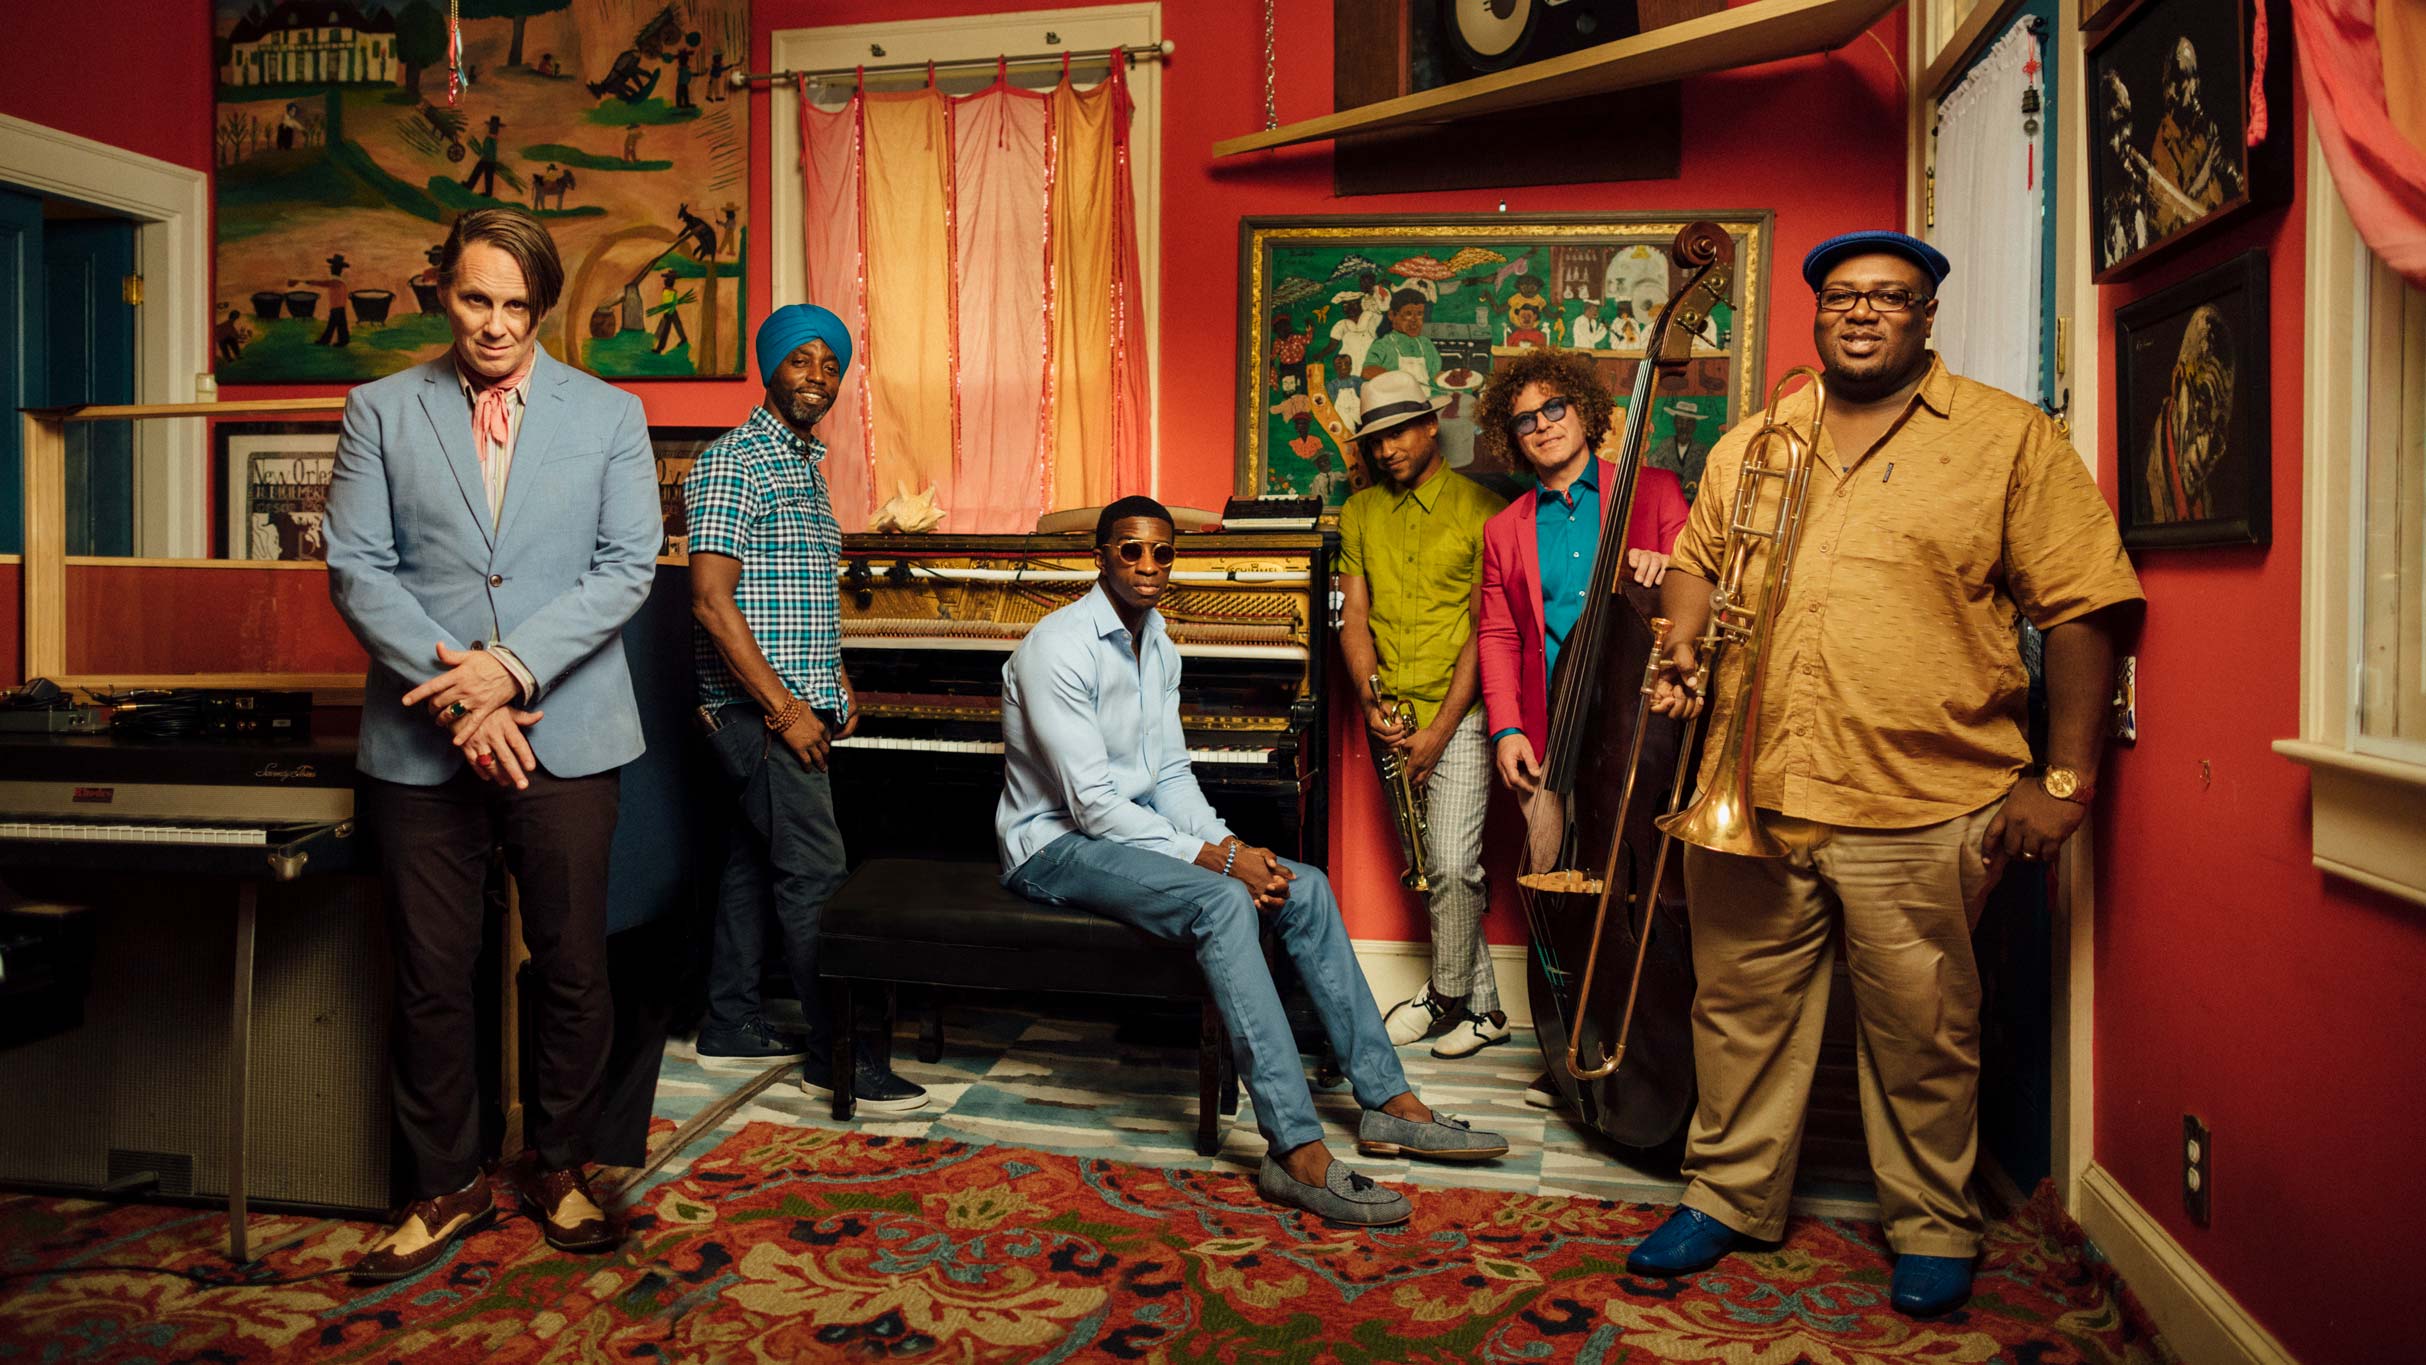 Preservation Hall Jazz Band in Winnipeg promo photo for All Access presale offer code